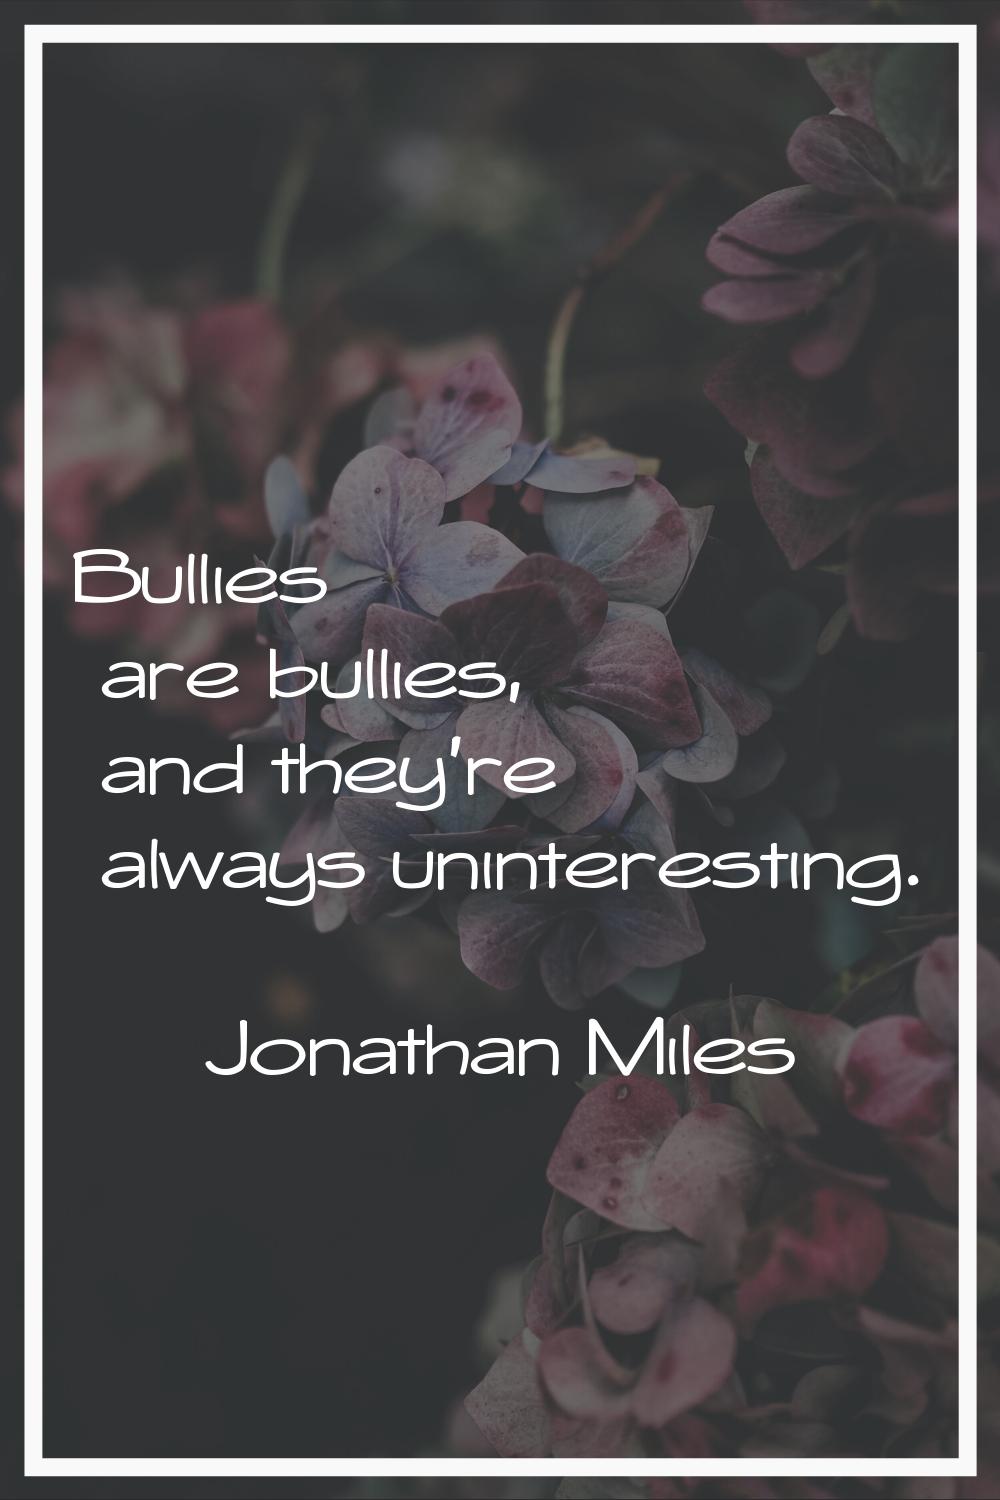 Bullies are bullies, and they're always uninteresting.